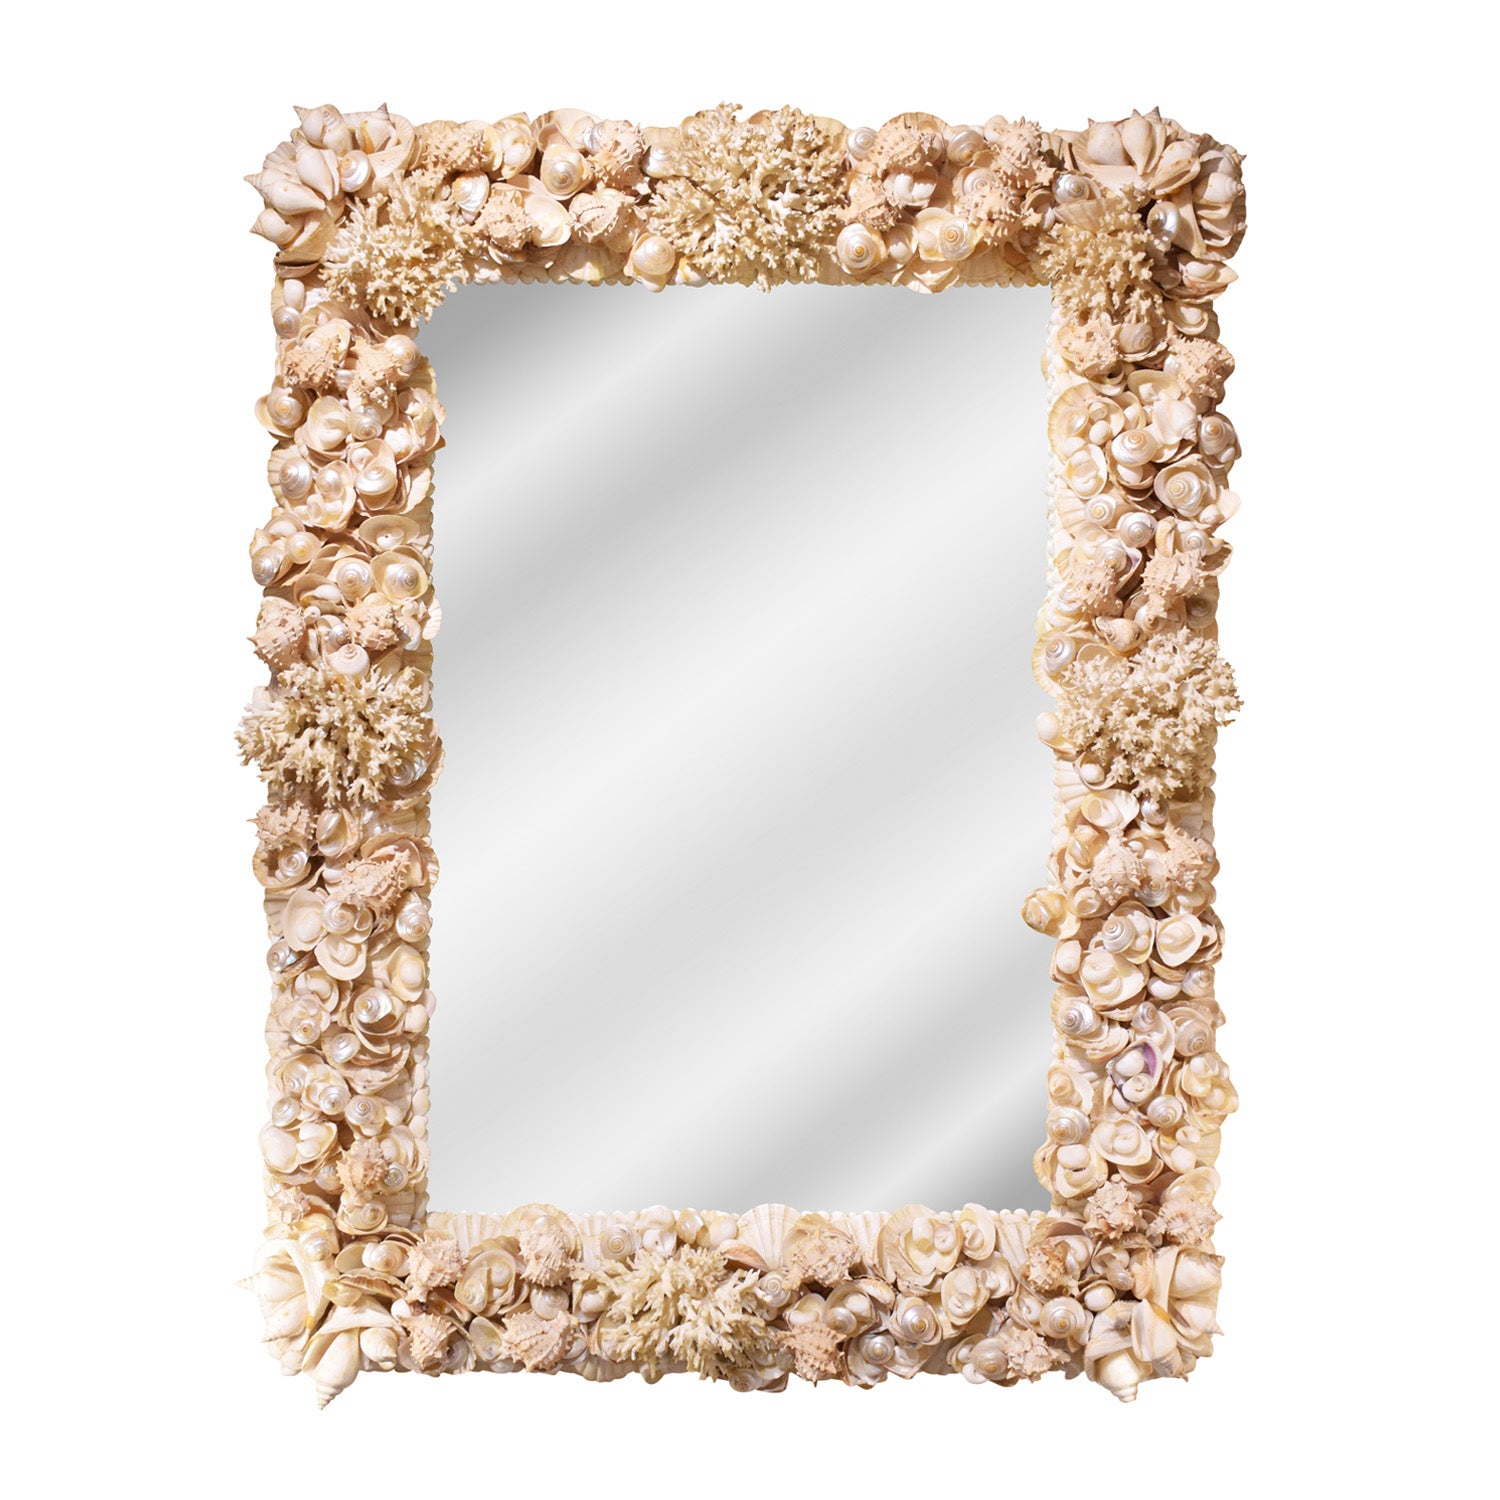 Exquisite Artisan Mirror with Applied Sea Shells and Coral, 1970s